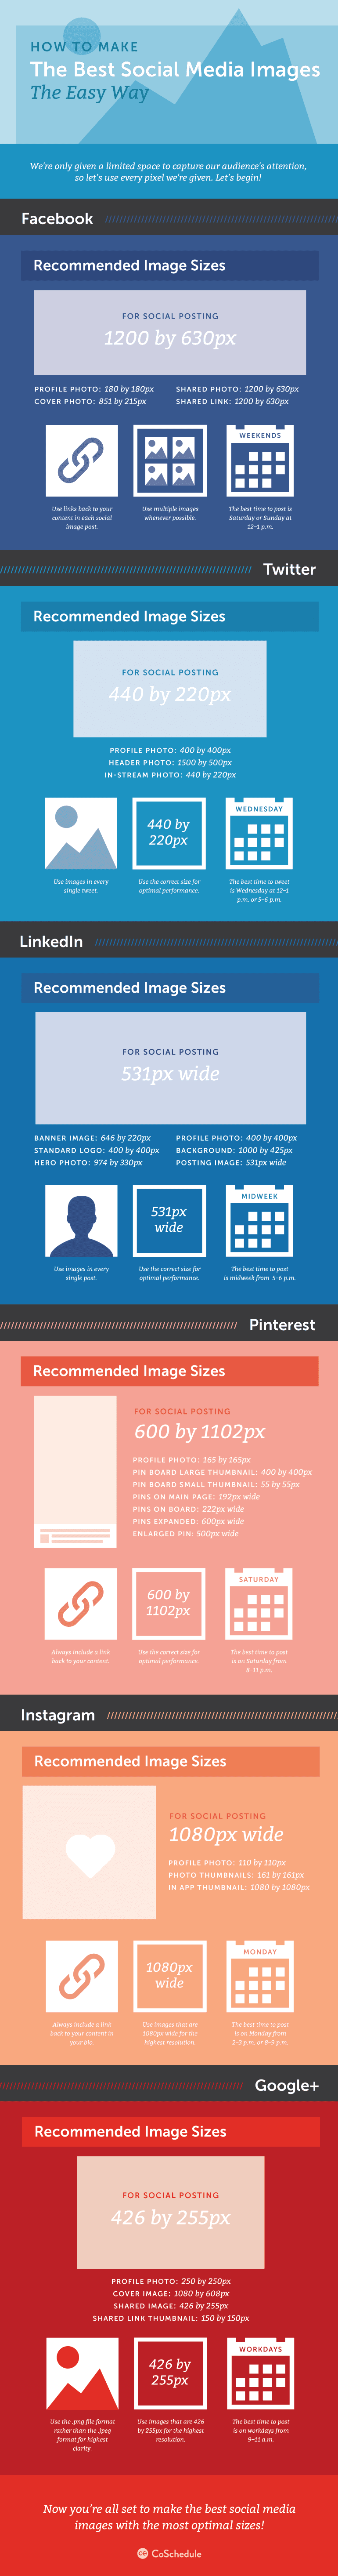 Here's How to Make Social Media Images